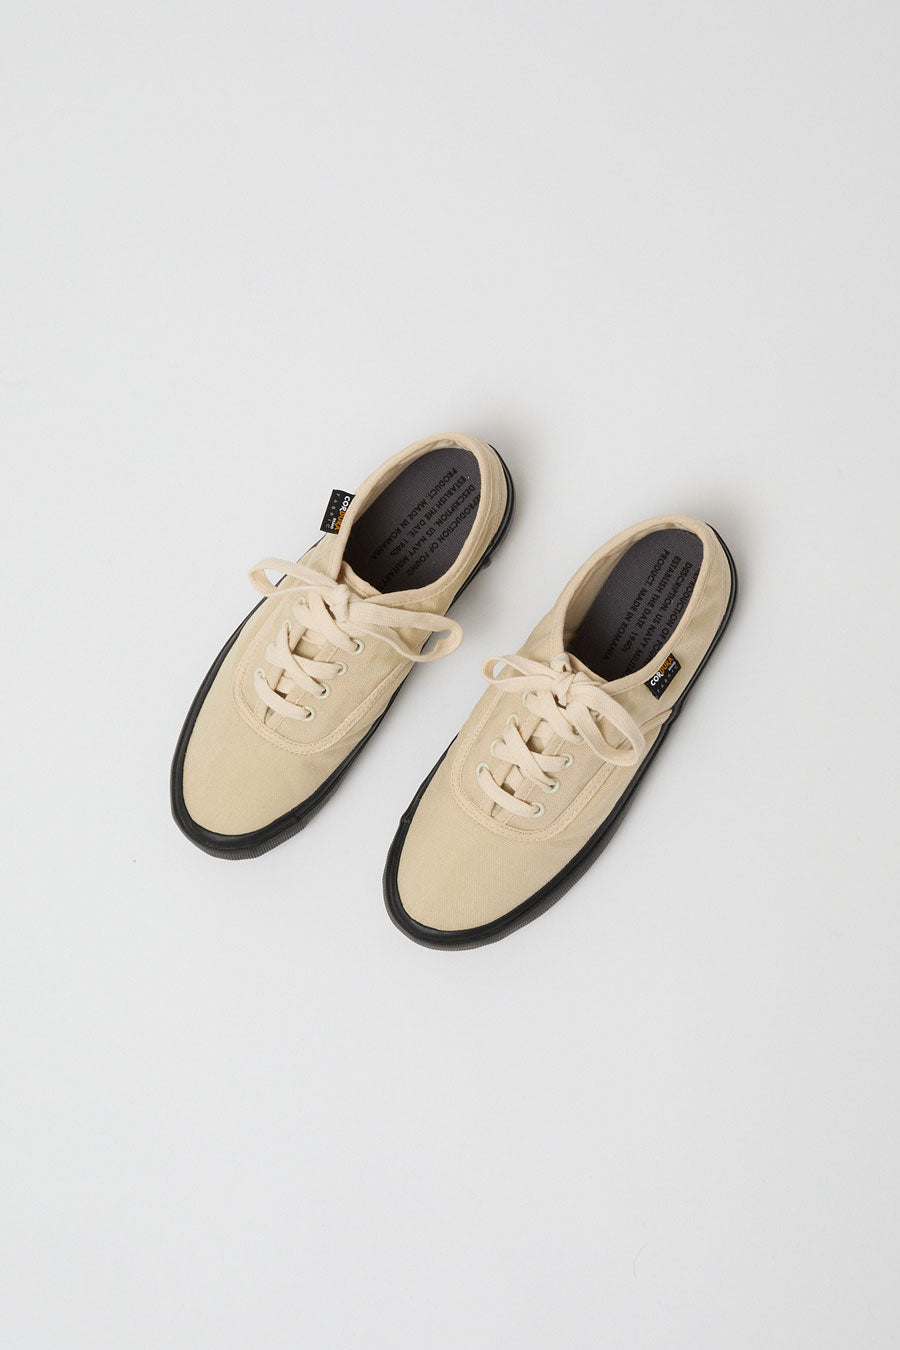 Reproduction of Found 5851 Trainer in Natural with Black Sole